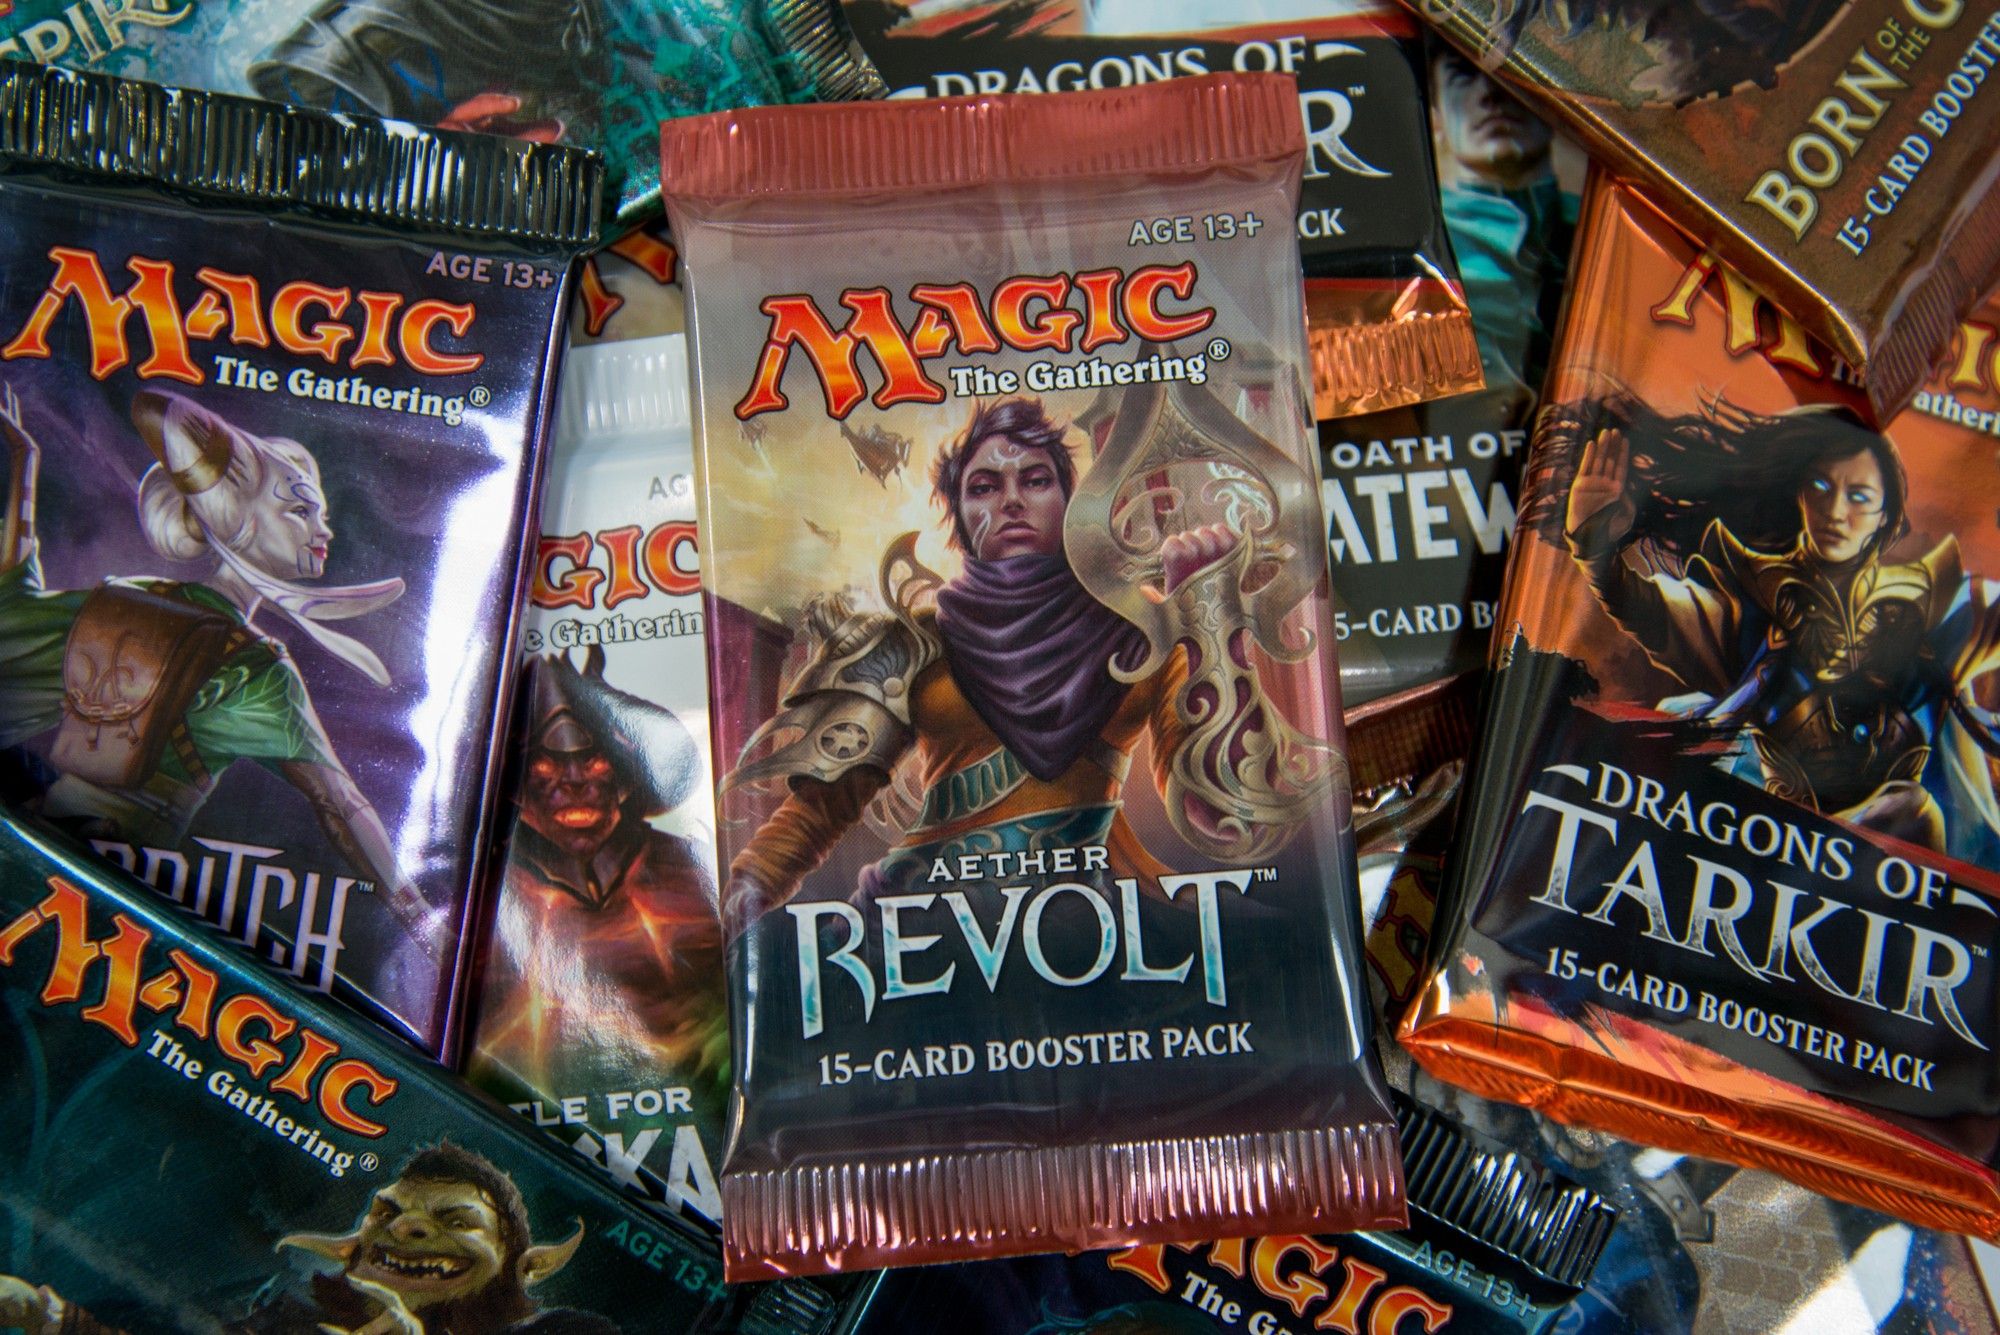 Limited edition Magic the Gatherings cards are valuable to players.